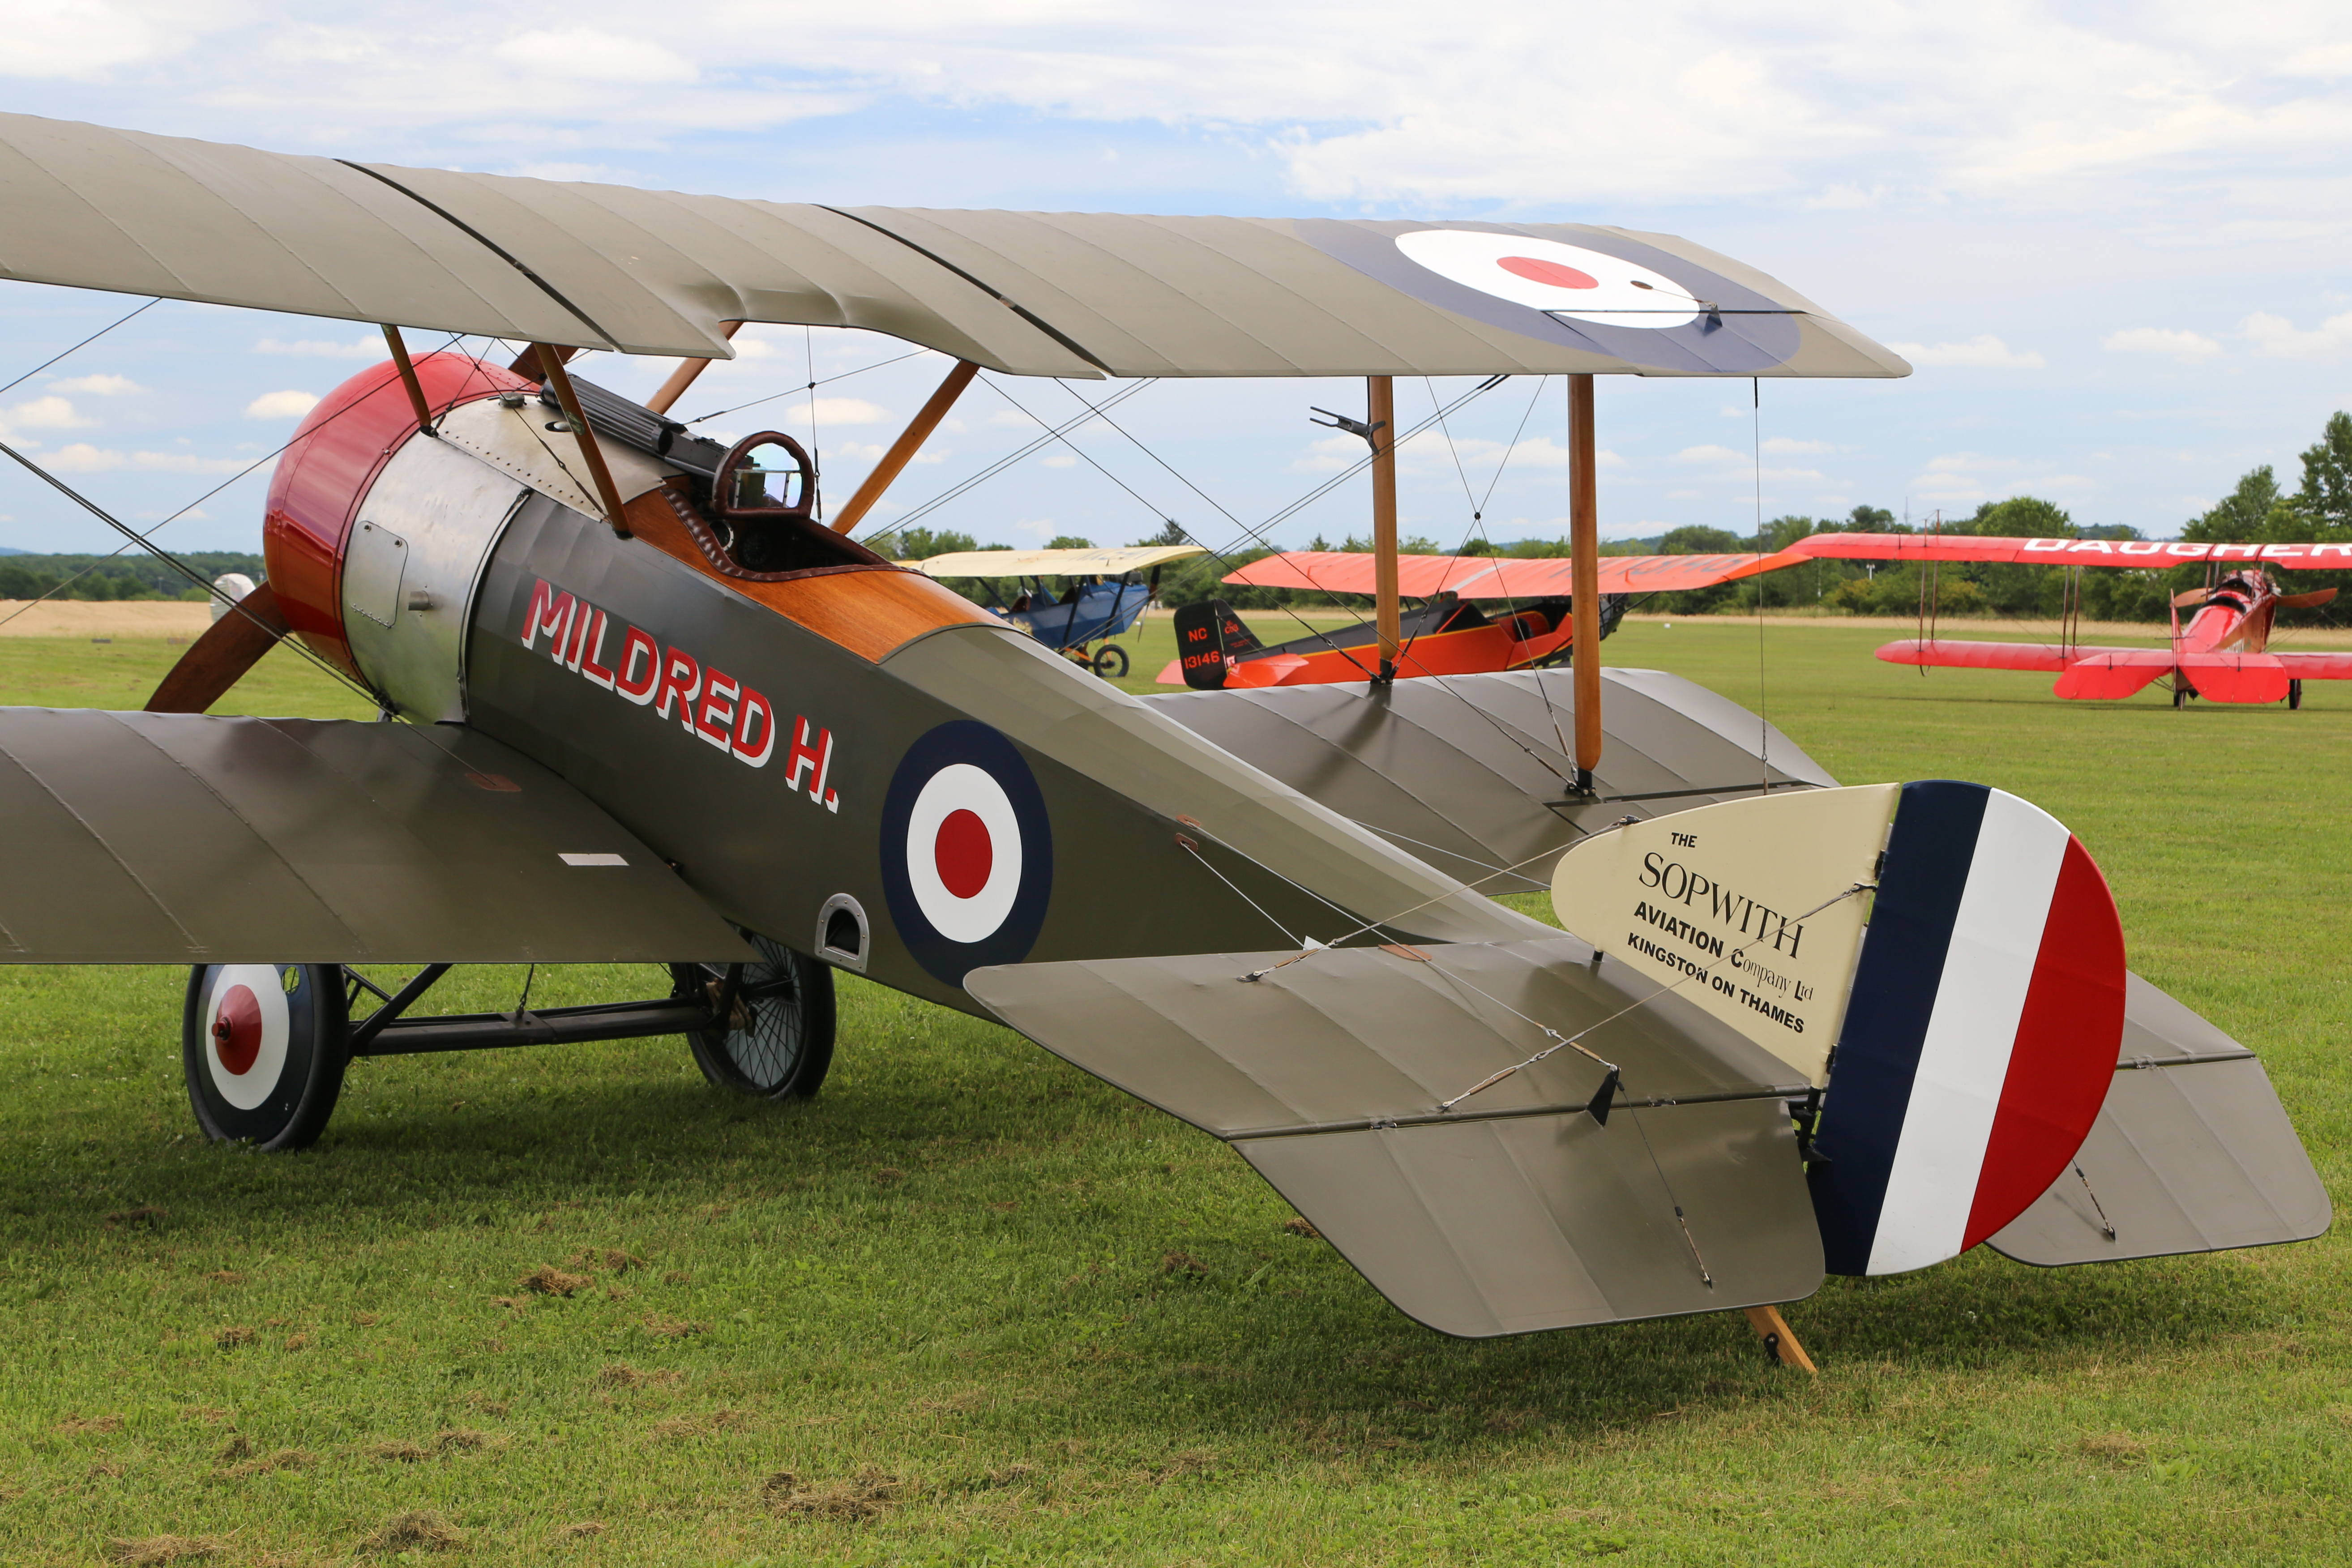 The Golden Age Museum’s Flying Circus Airshow is a hidden gem for vintage aircraft lovers